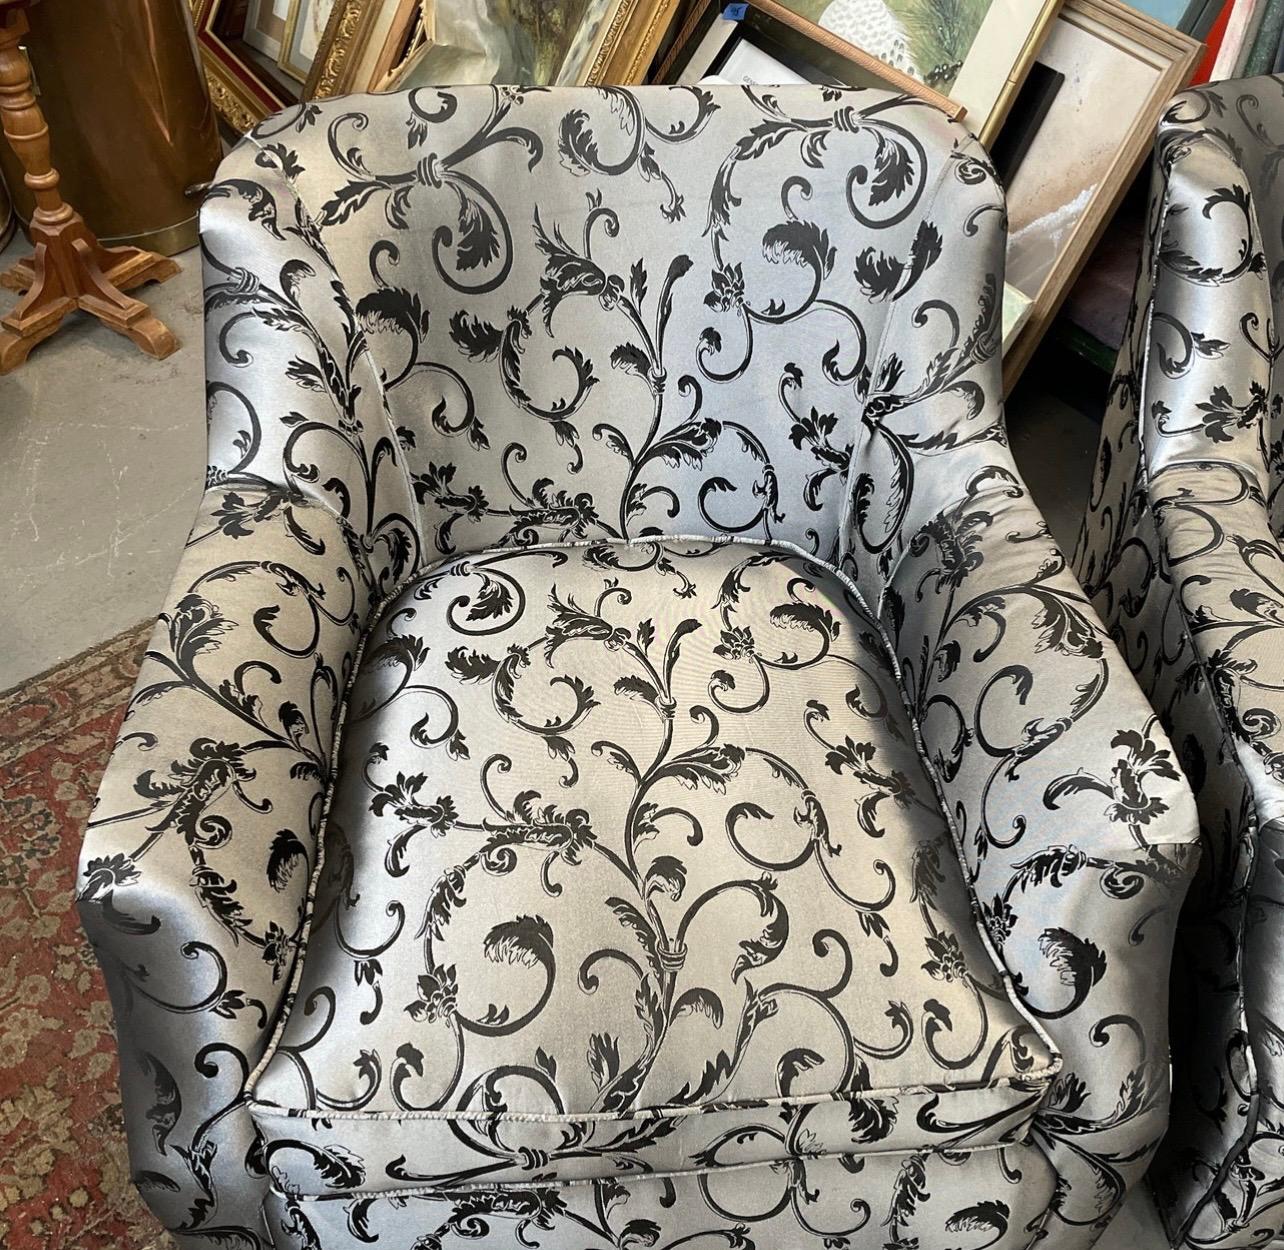 Stunning pair of matching vintage armchairs with caster wheels for ease of movement. However it is the showstopper upholstery that makes this pair a must have.